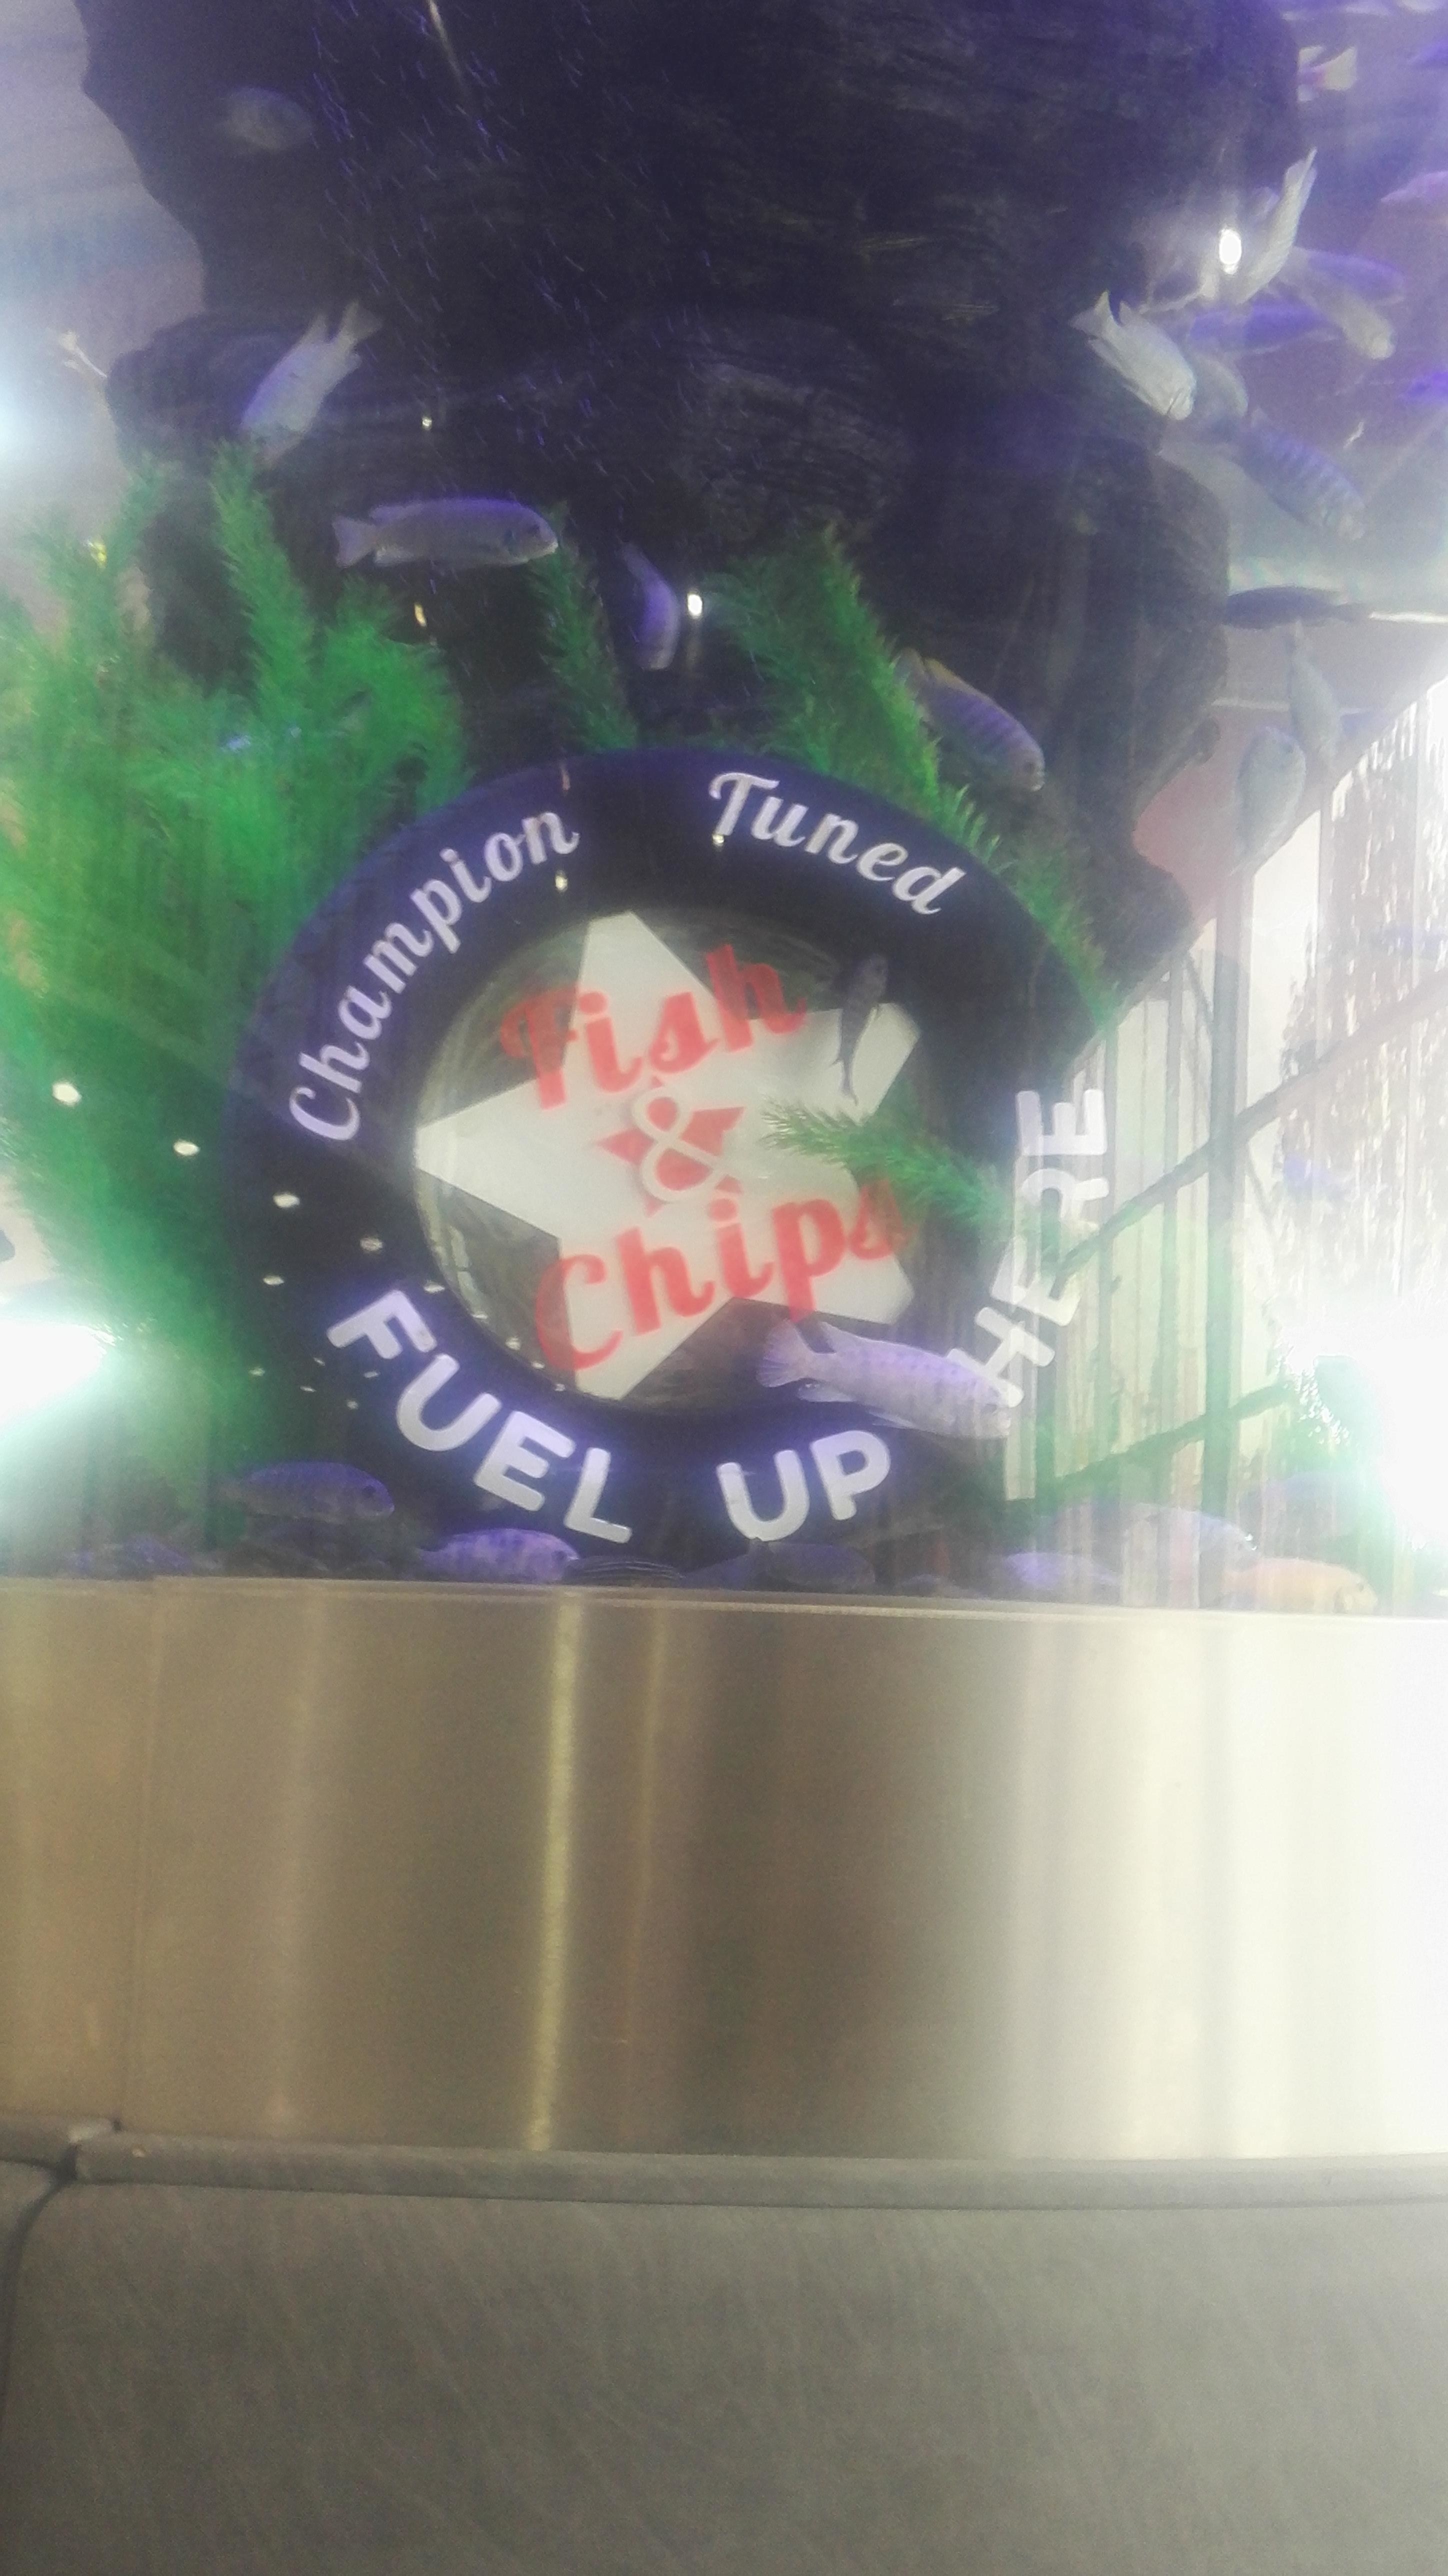 &quot;fish and chips fuel up here&quot; sign in a fish tank